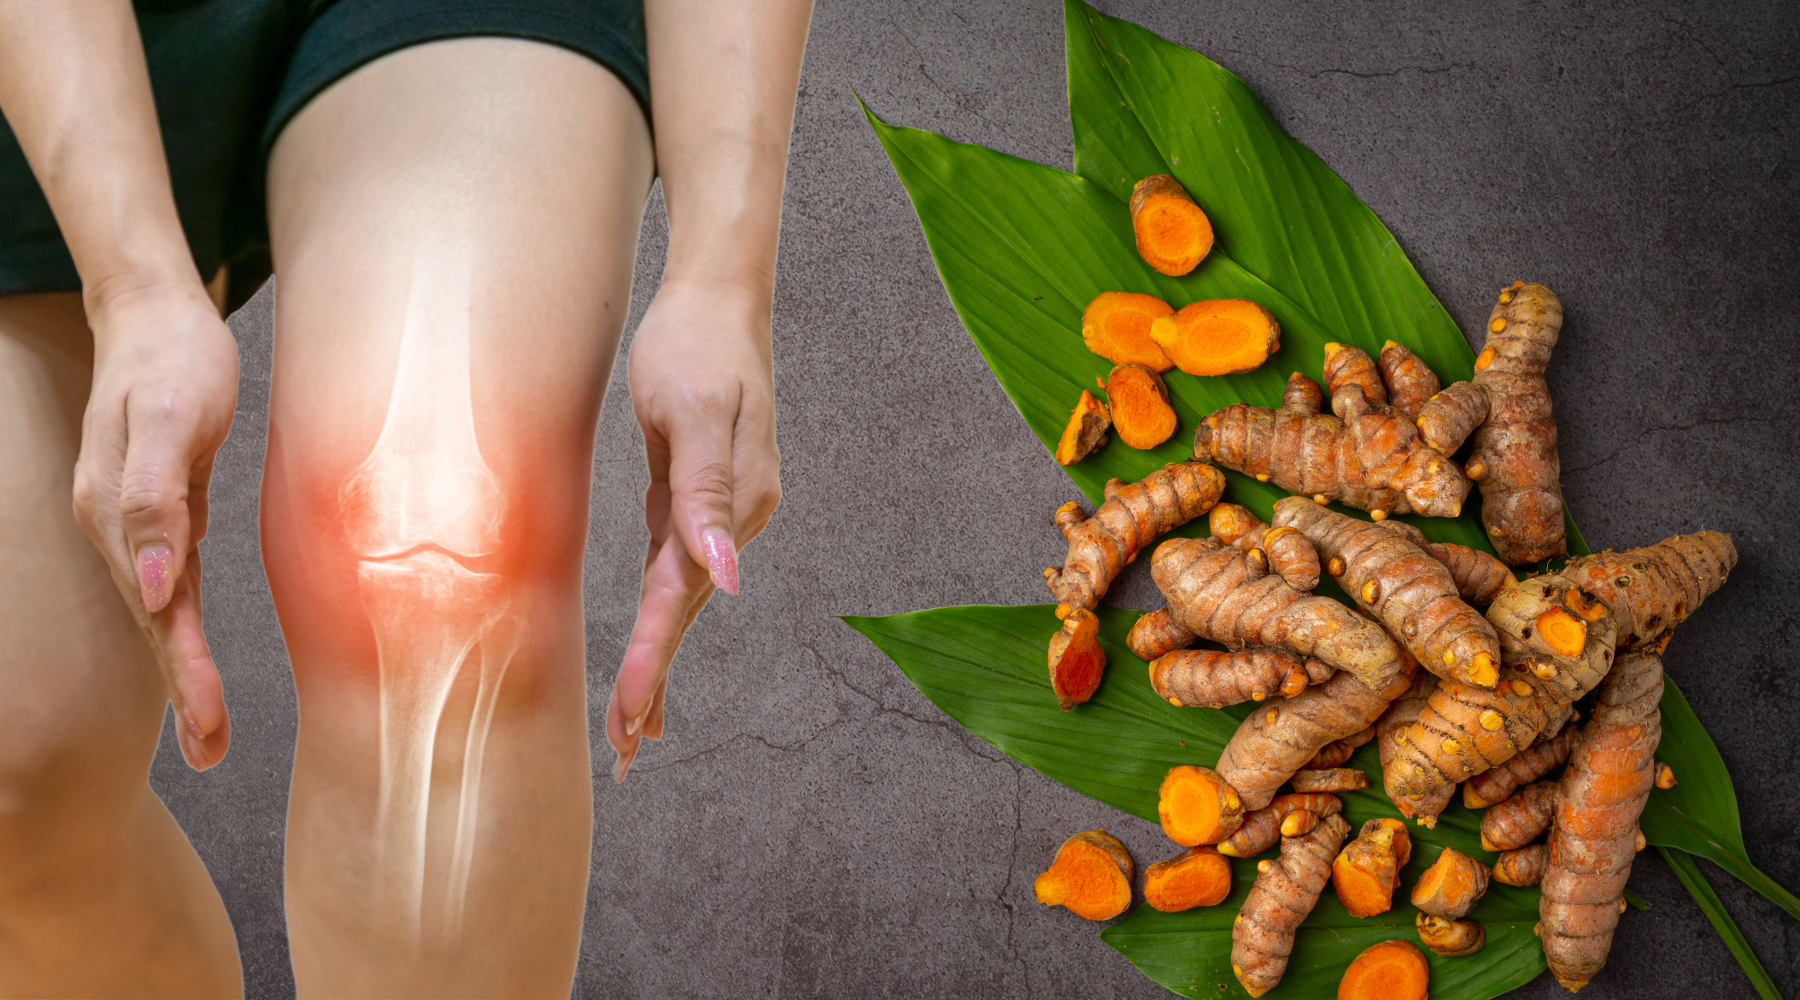 Inflammation and Joint Mobility: The Power of Turmeric, Curcuminoids, and Other Natural Supplements